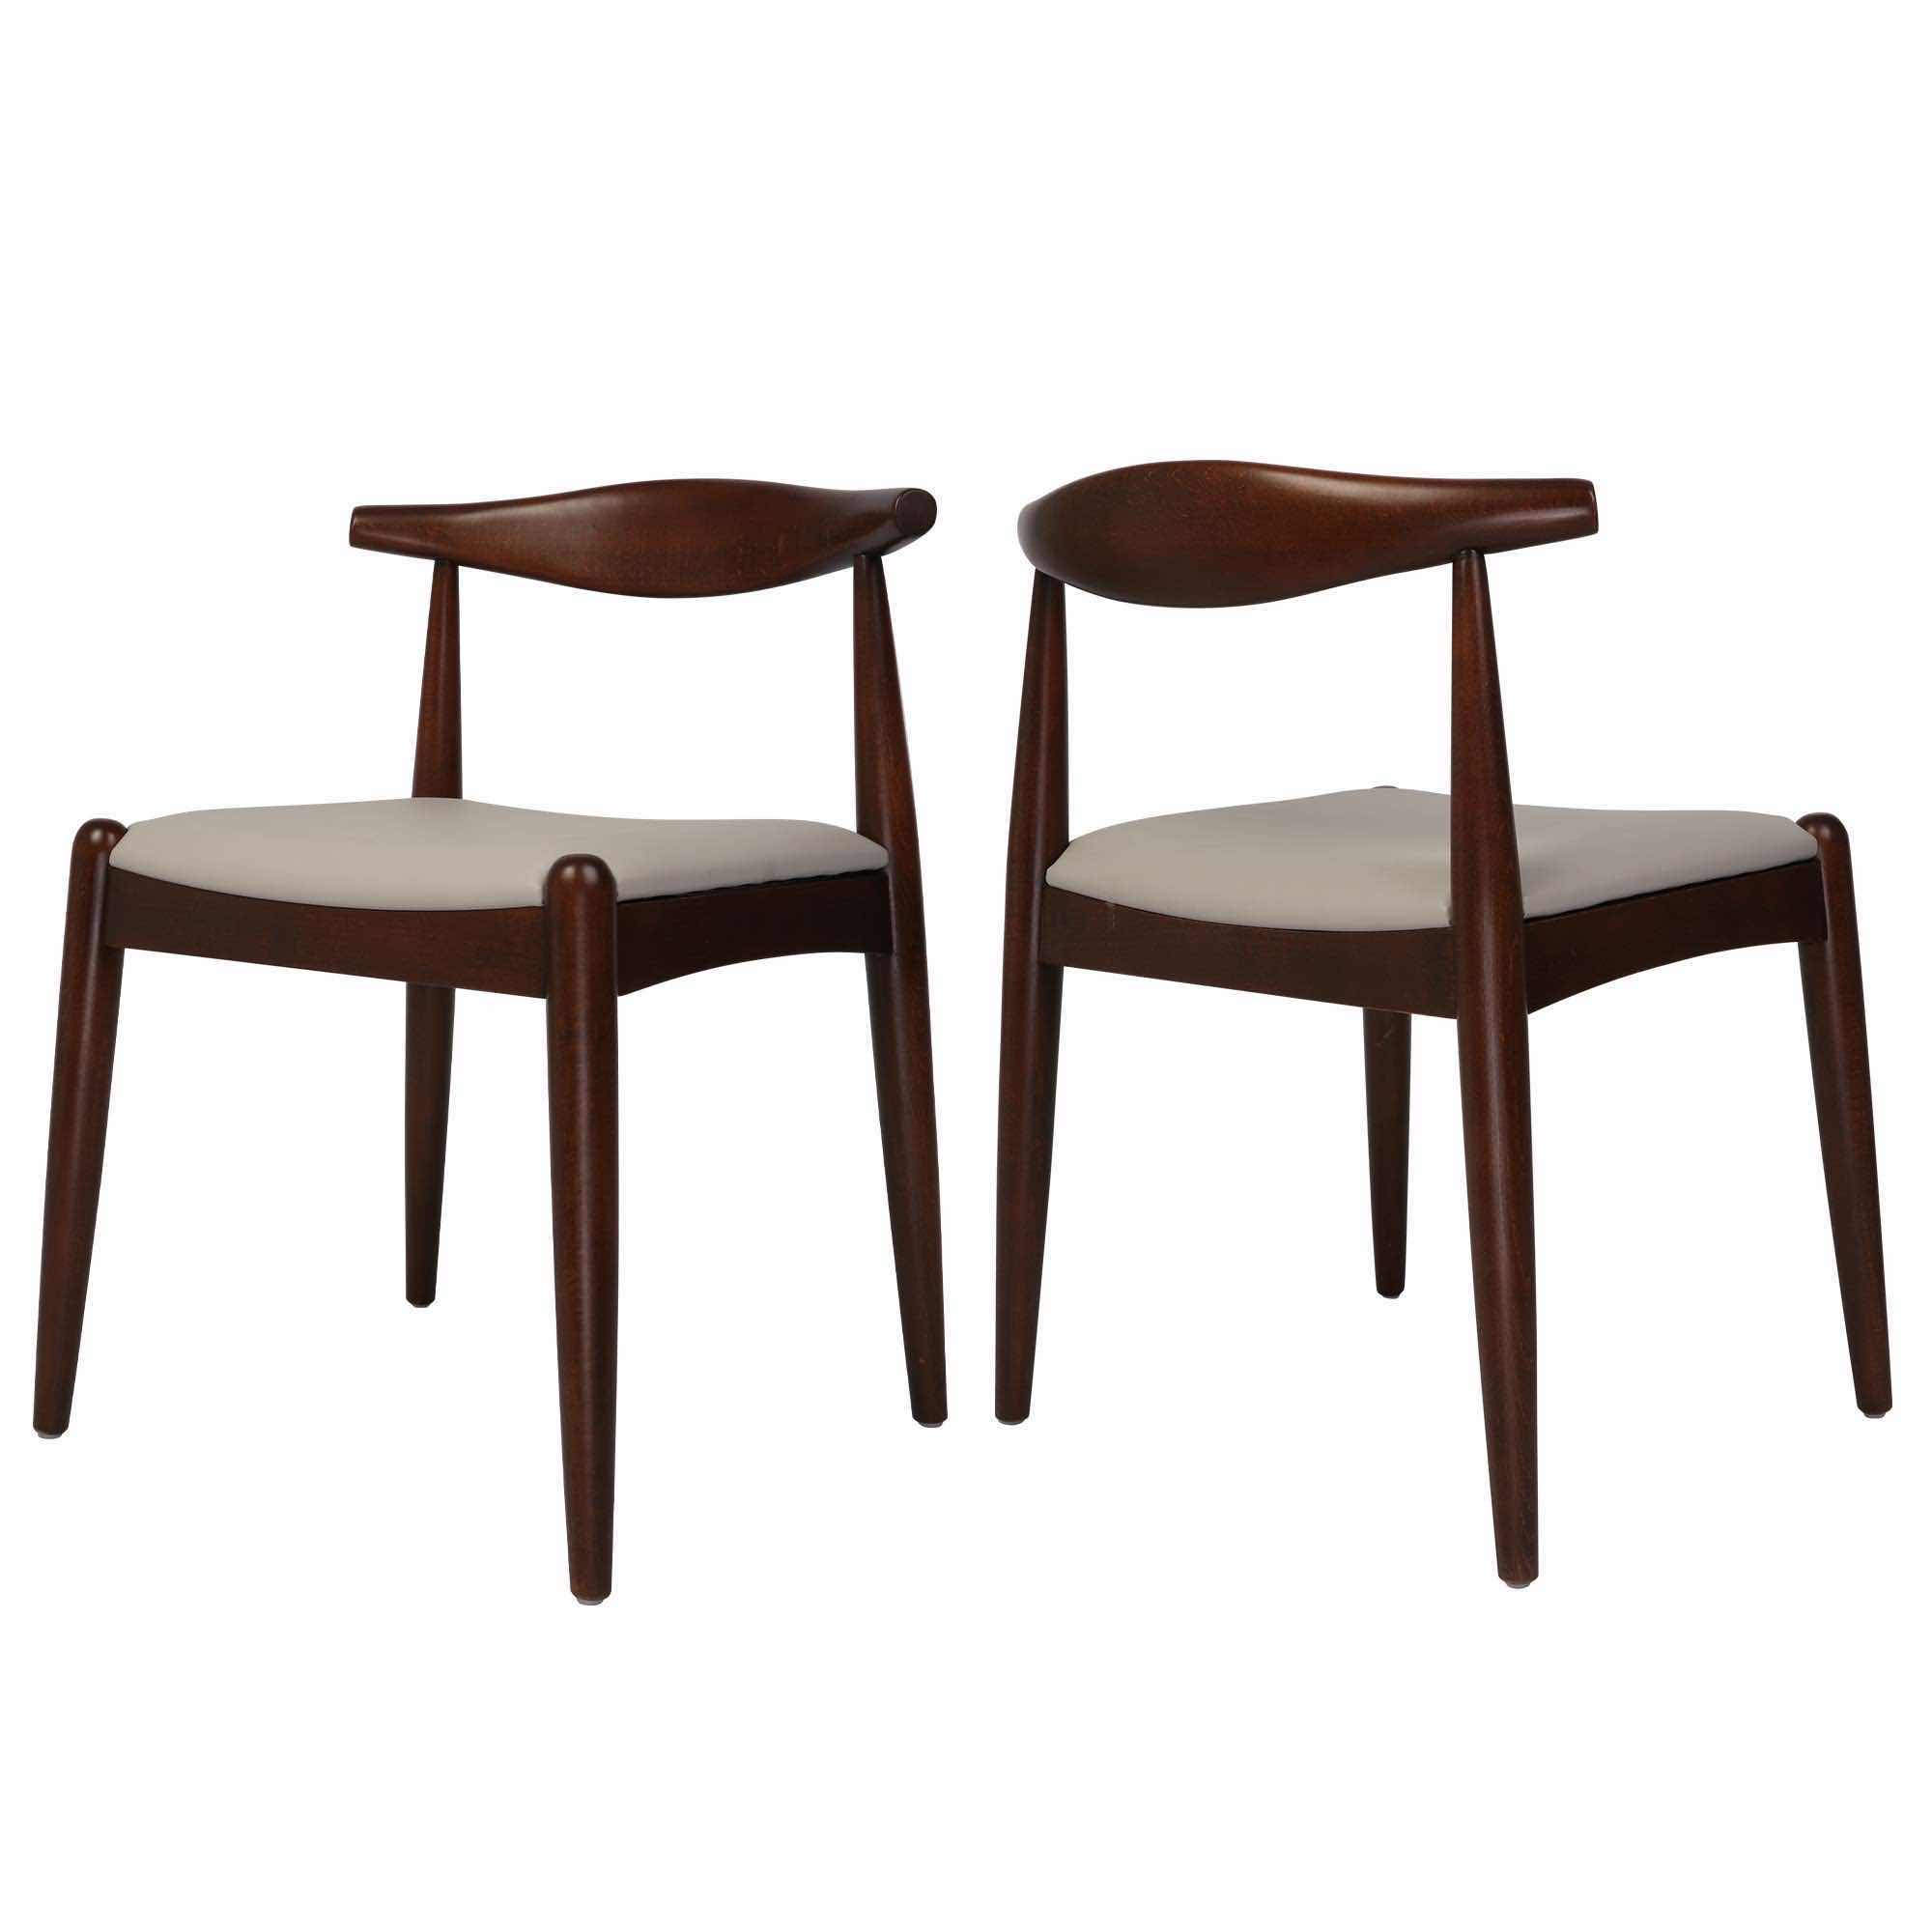 Photo 1 of MID-CENTURY MODERN BROWN WOOD FINISH & LIGHT GREY FABRIC SEATED ARMLESS DINING CHAIRS SET OF 2 MODEL 59296.00FDBEI